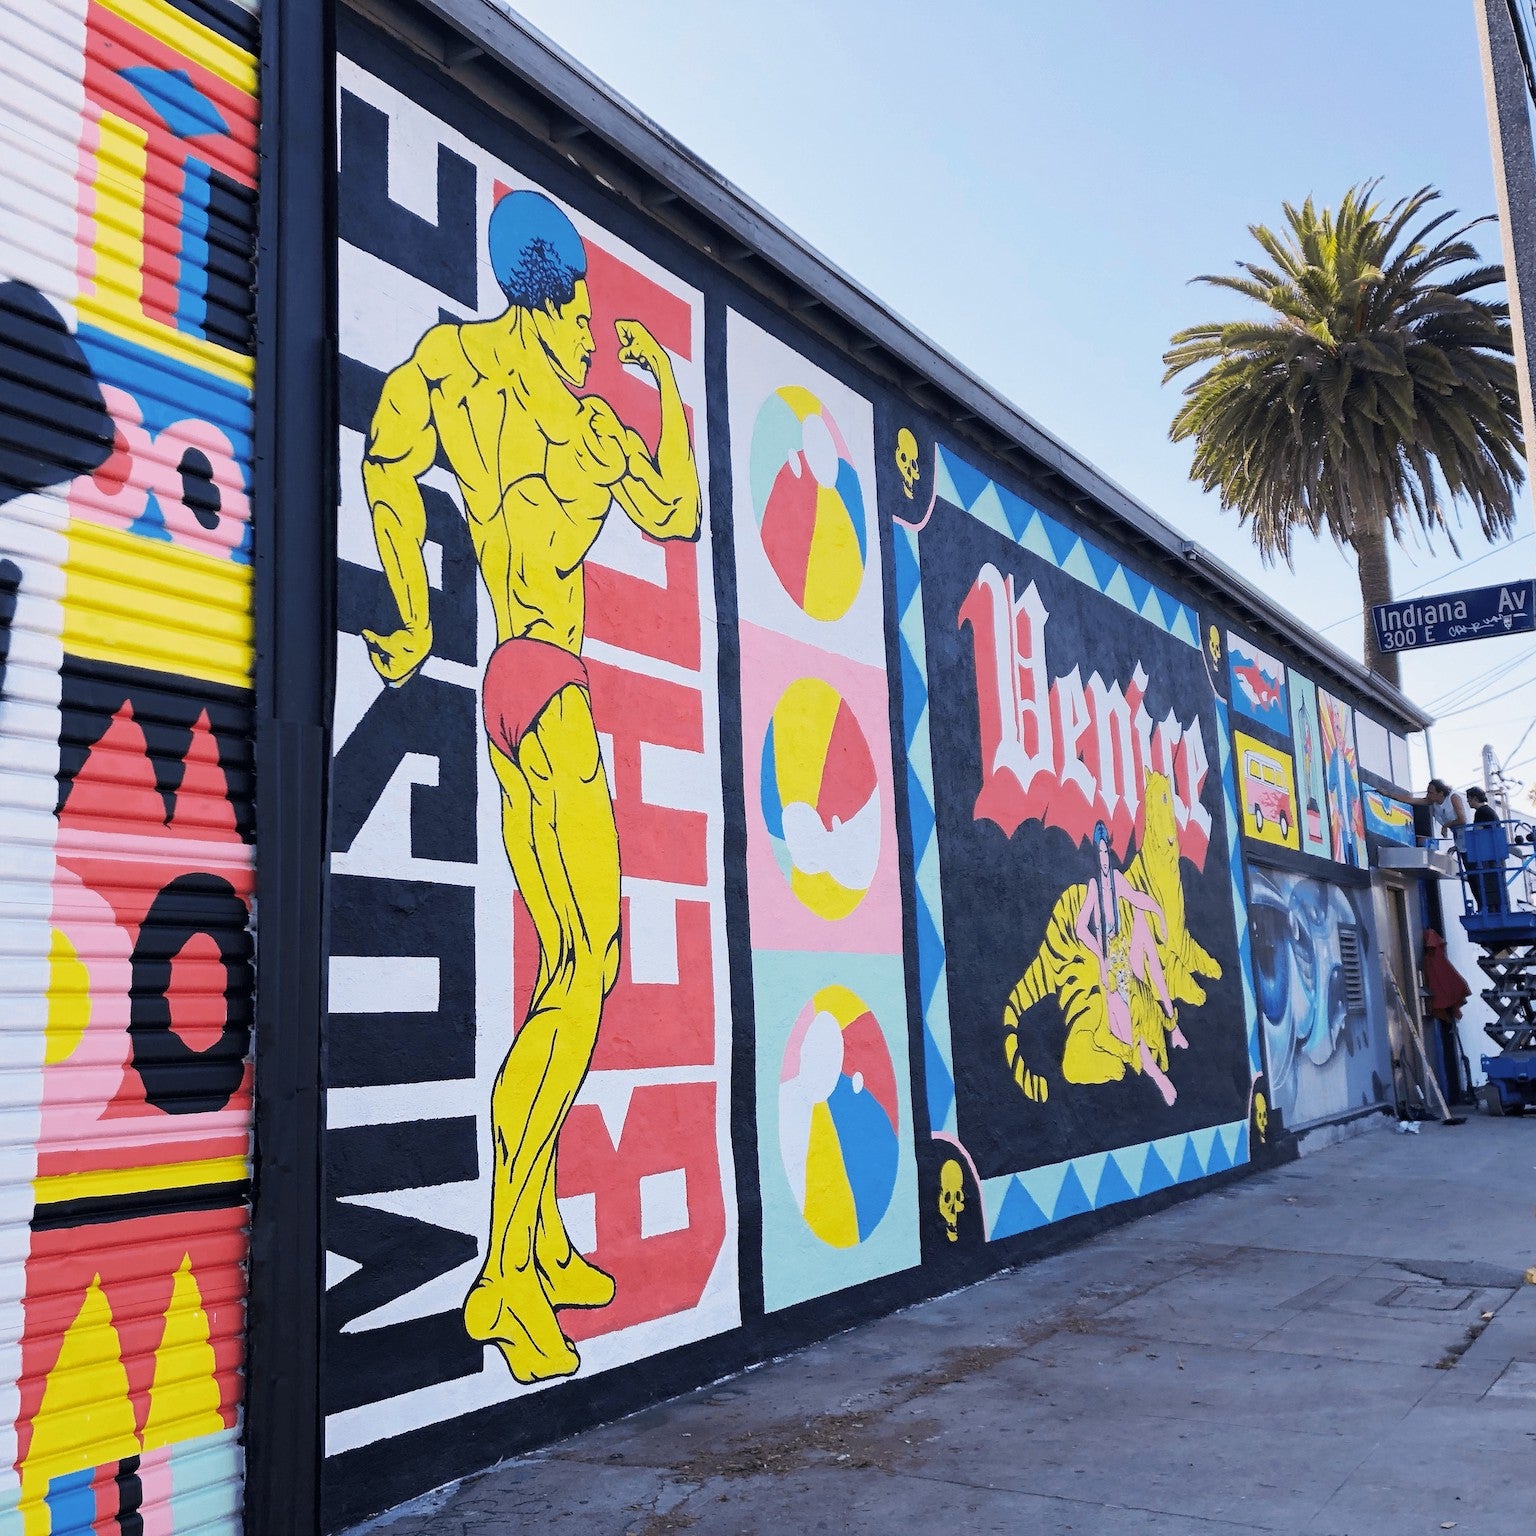 Colorful street mural by WRAPPED Studio on the exterior of Charles Arnoldi's art studio in Venice, featuring a dynamic collage of local icons, including a depiction of Arnold Schwarzenegger.